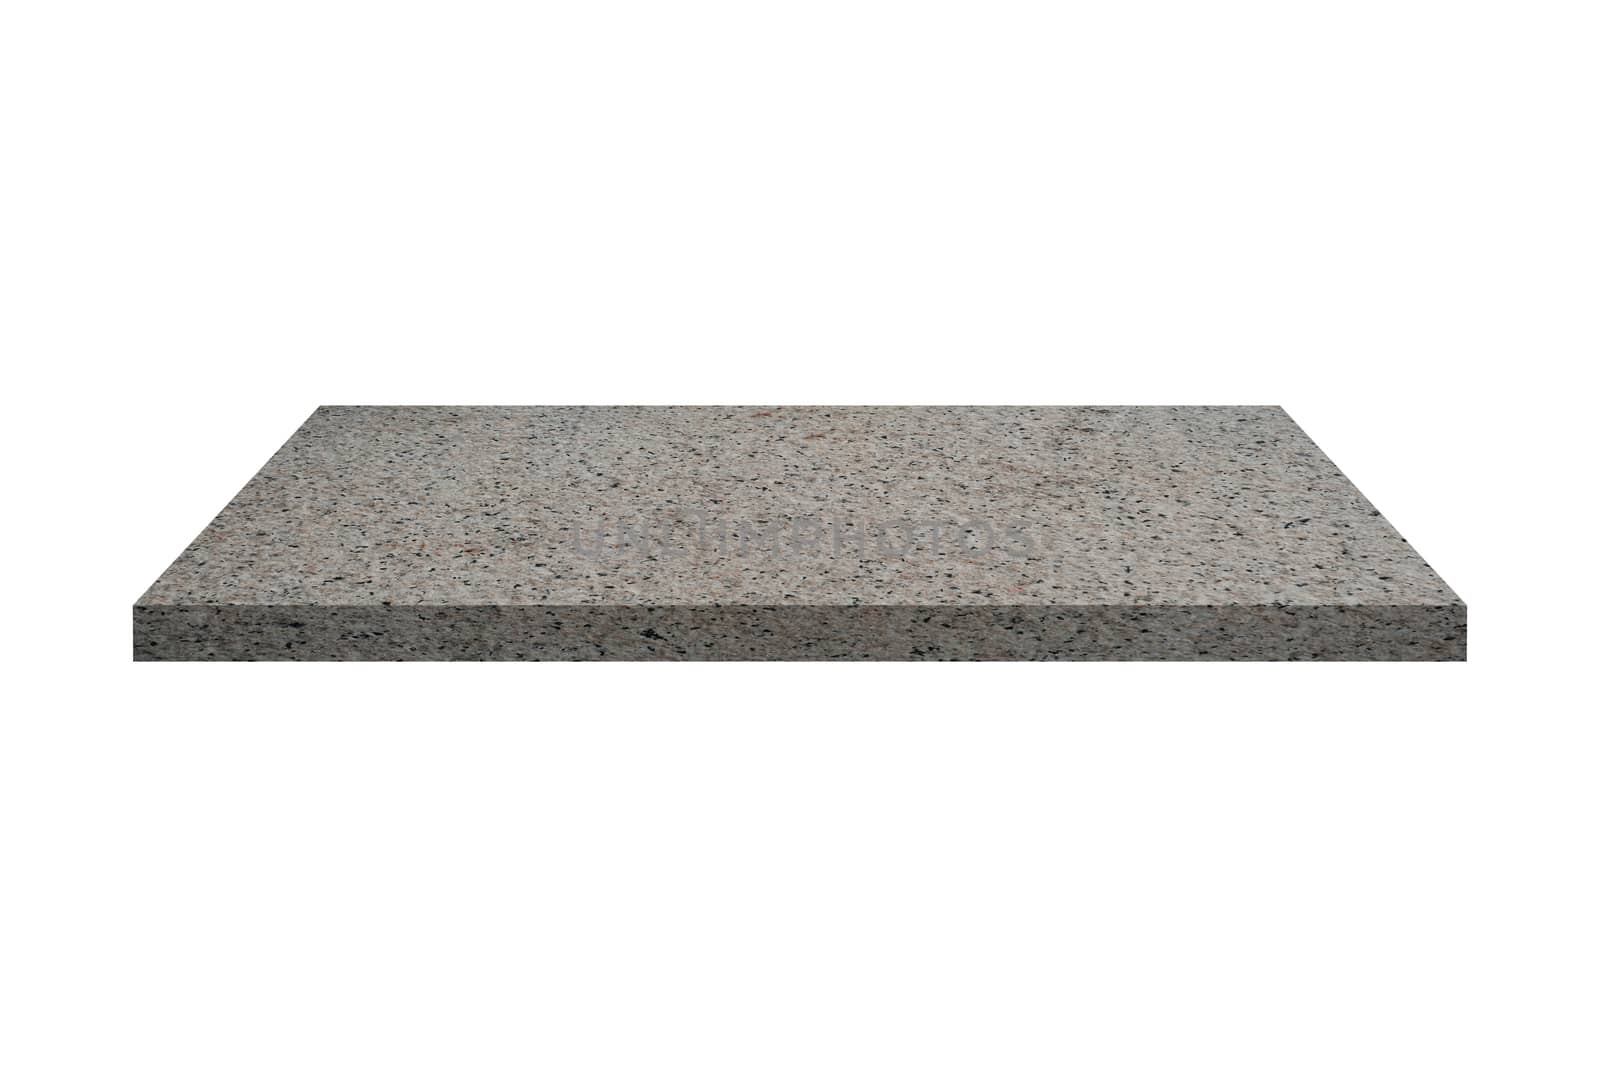 Granite shelf isolated on white background with clipping path. by Urvashi-A